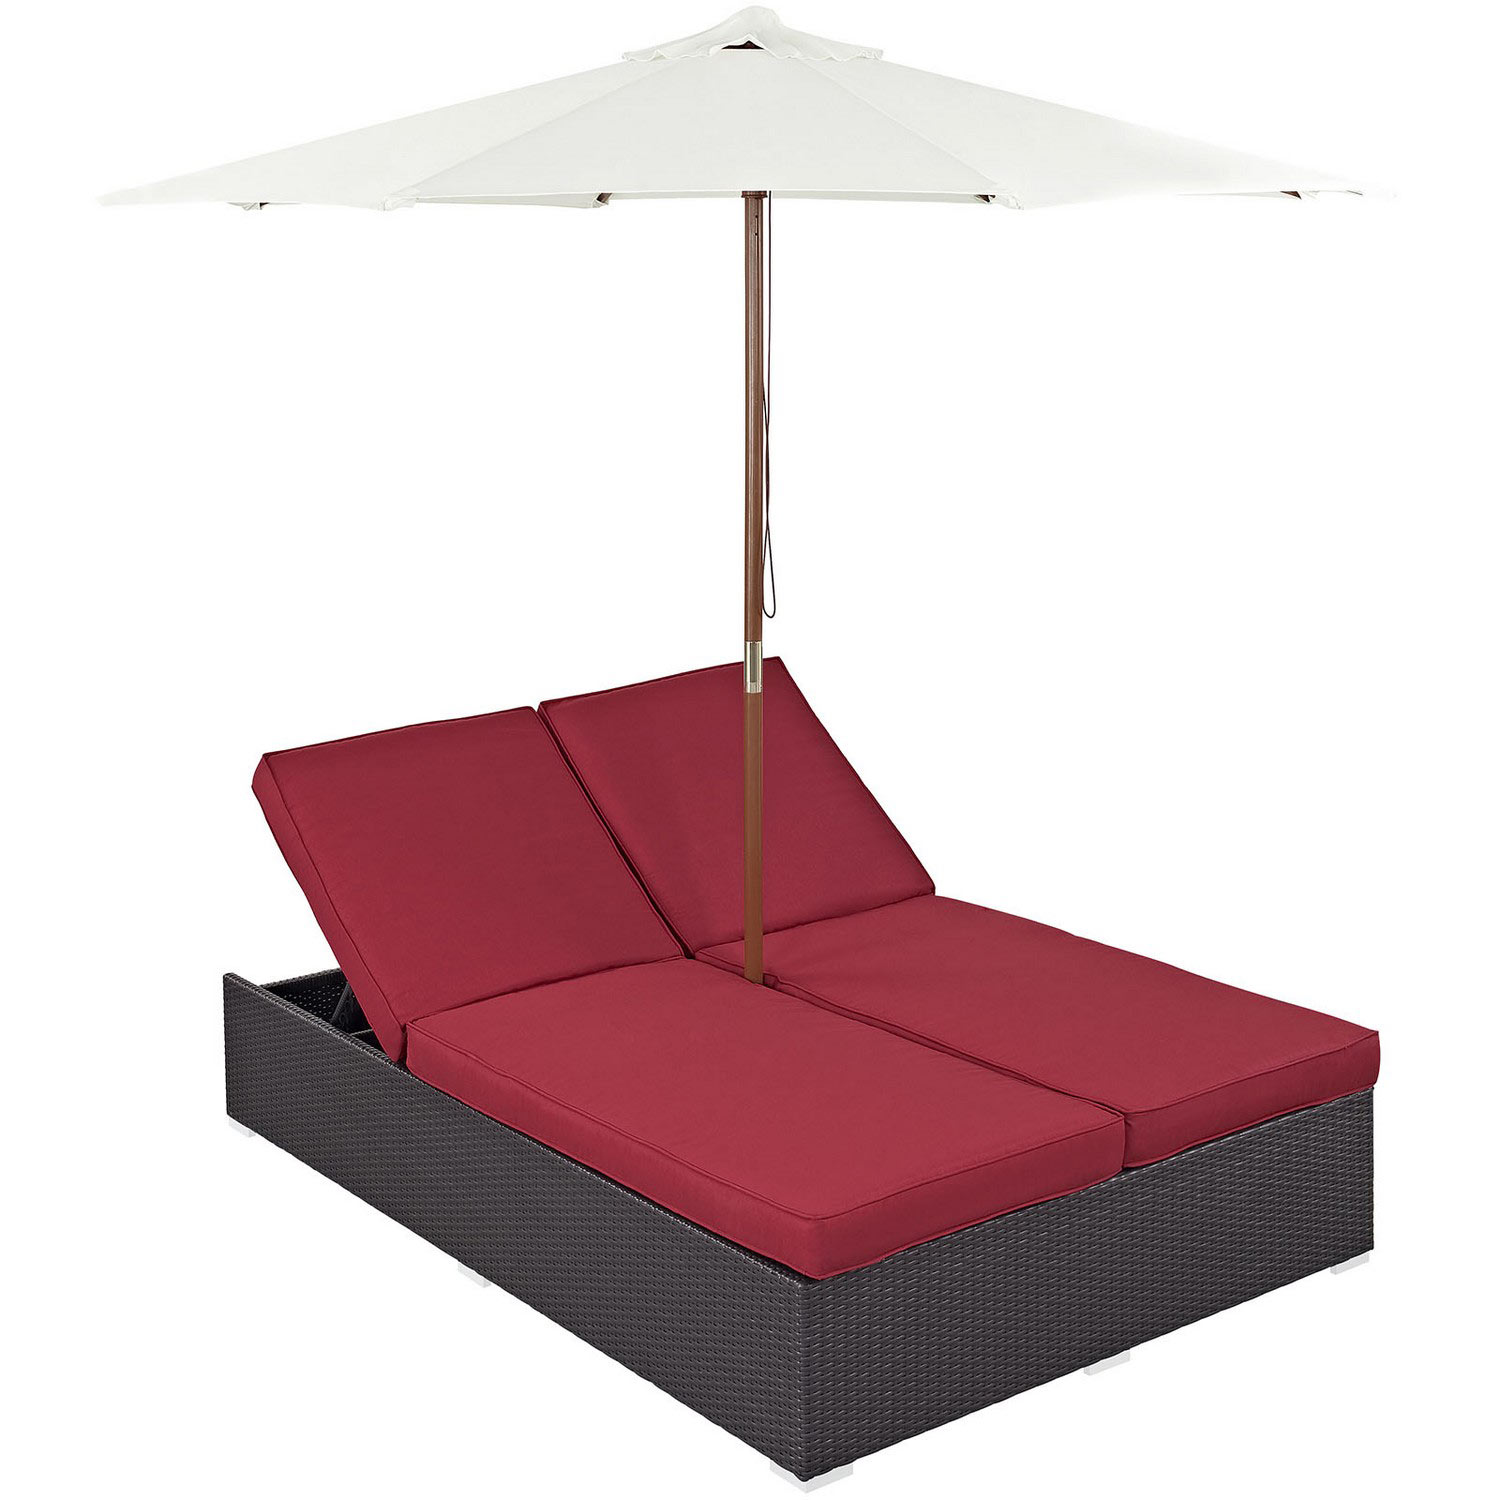 Modway Convene Double Outdoor Patio Chaise - Espresso Red